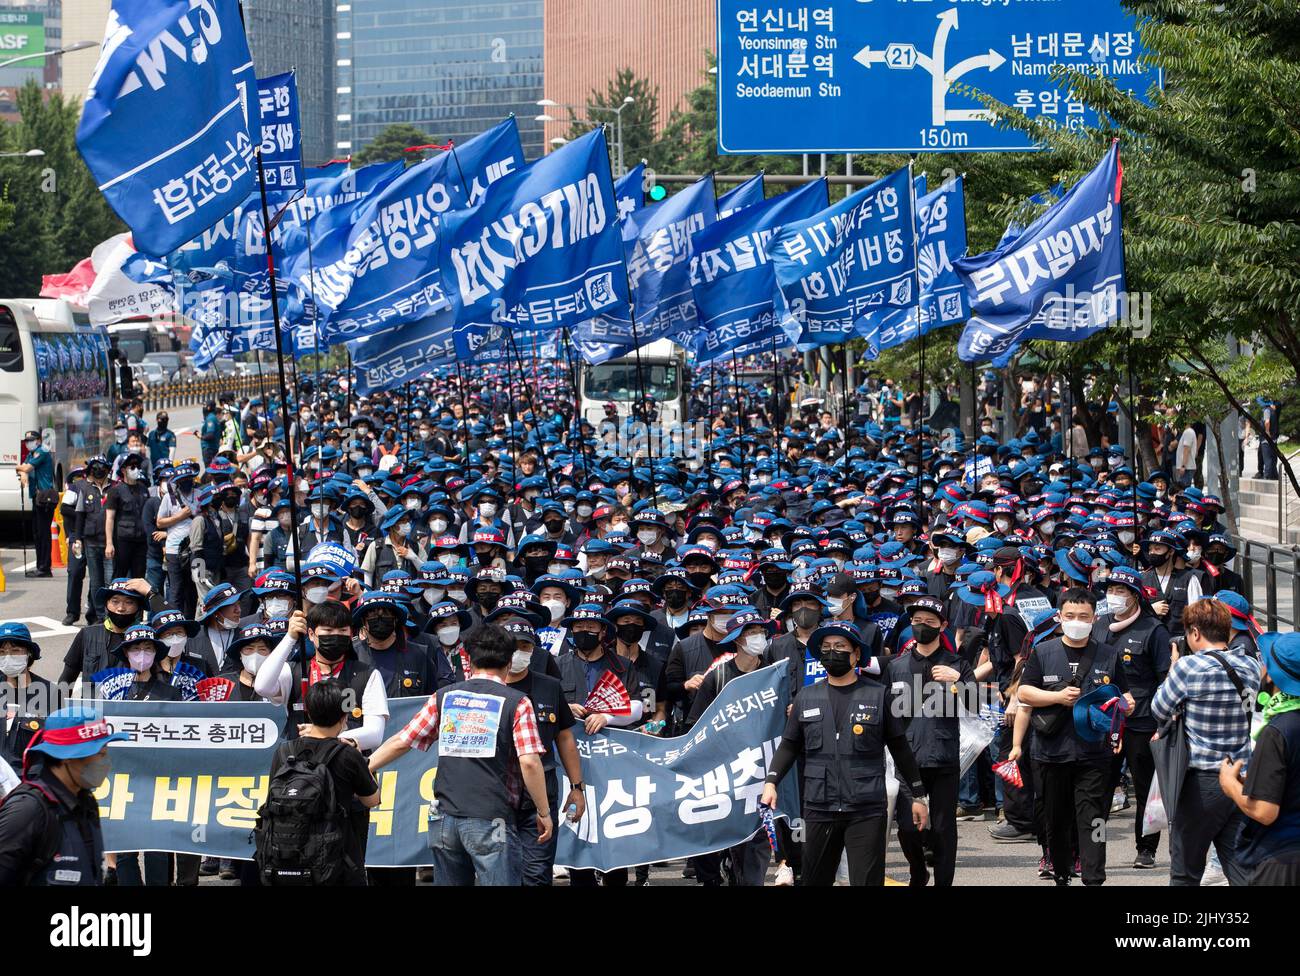 Seoul, South Korea. 20th July, 2022. About ten thousand Korean Metal Worker's Union members attend with shout slogan during a march against the South Korean government work polish at downtown in Seoul, South Korea in July 20, 2022. Striking subcontract workers at Daewoo Shipbuilding and Marine Engineering Co. (DSME) have narrowed differences in wage negotiations with the management, raising the possibility of a deal to end the weekslong walkout, sources said Wednesday. (Photo by Lee Young-ho/Sipa USA) Credit: Sipa USA/Alamy Live News Stock Photo